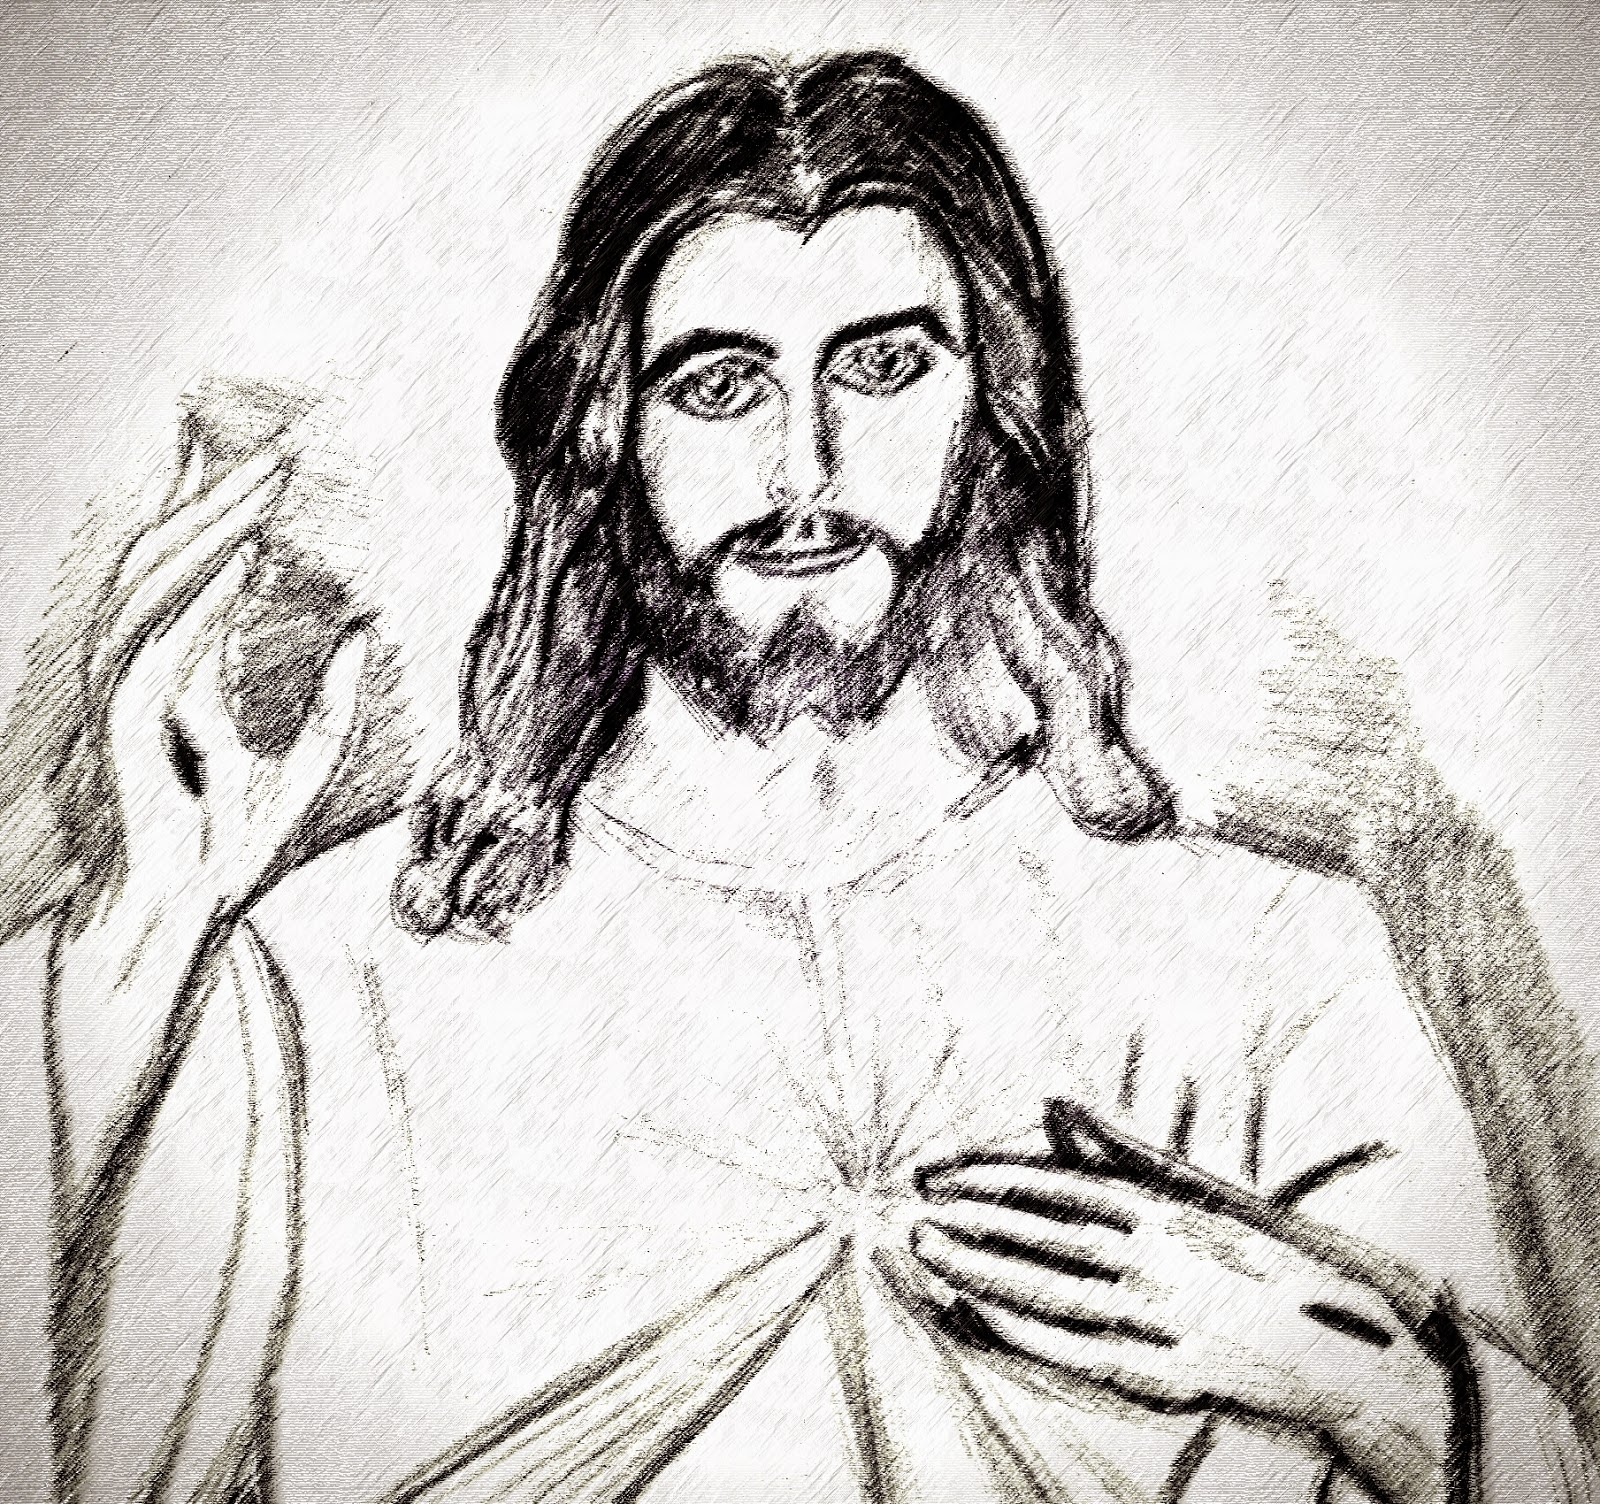  Jesus Christ Hand Sketches Drawings for Adult